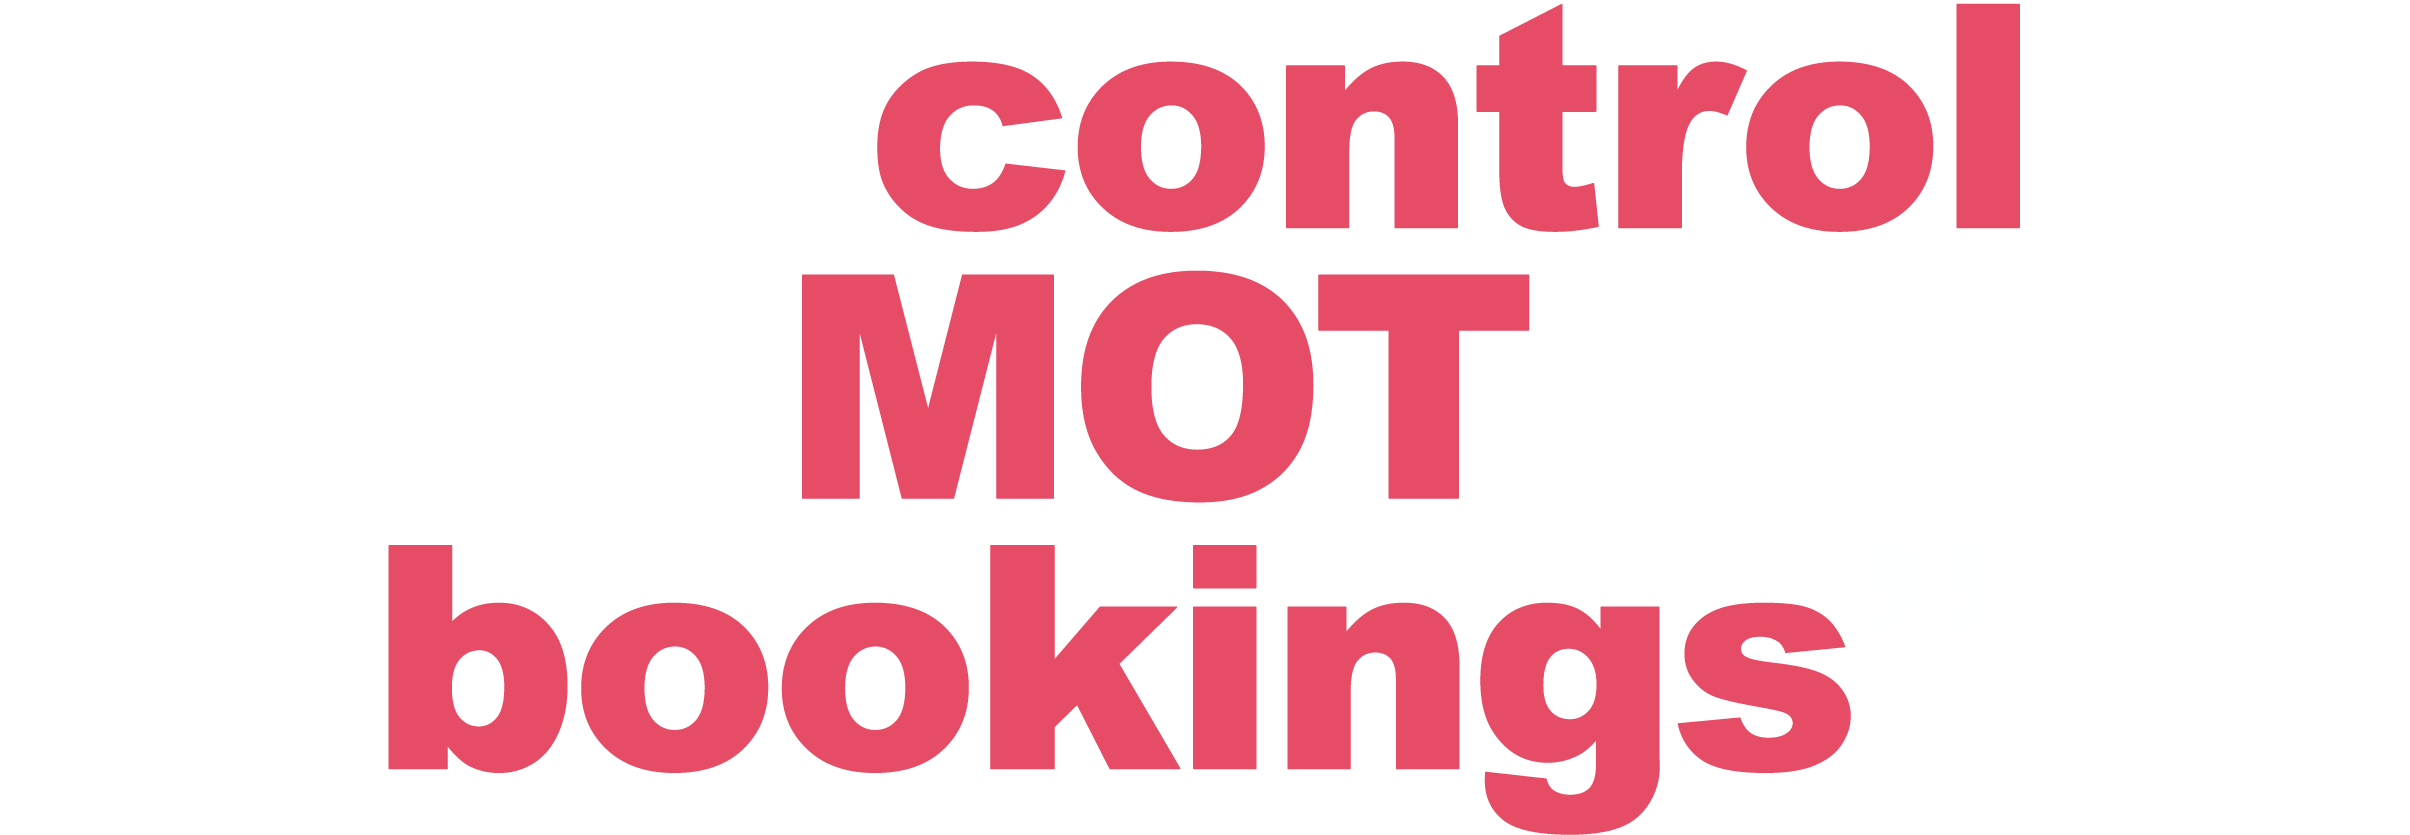 Take control of your MOT diary bookings